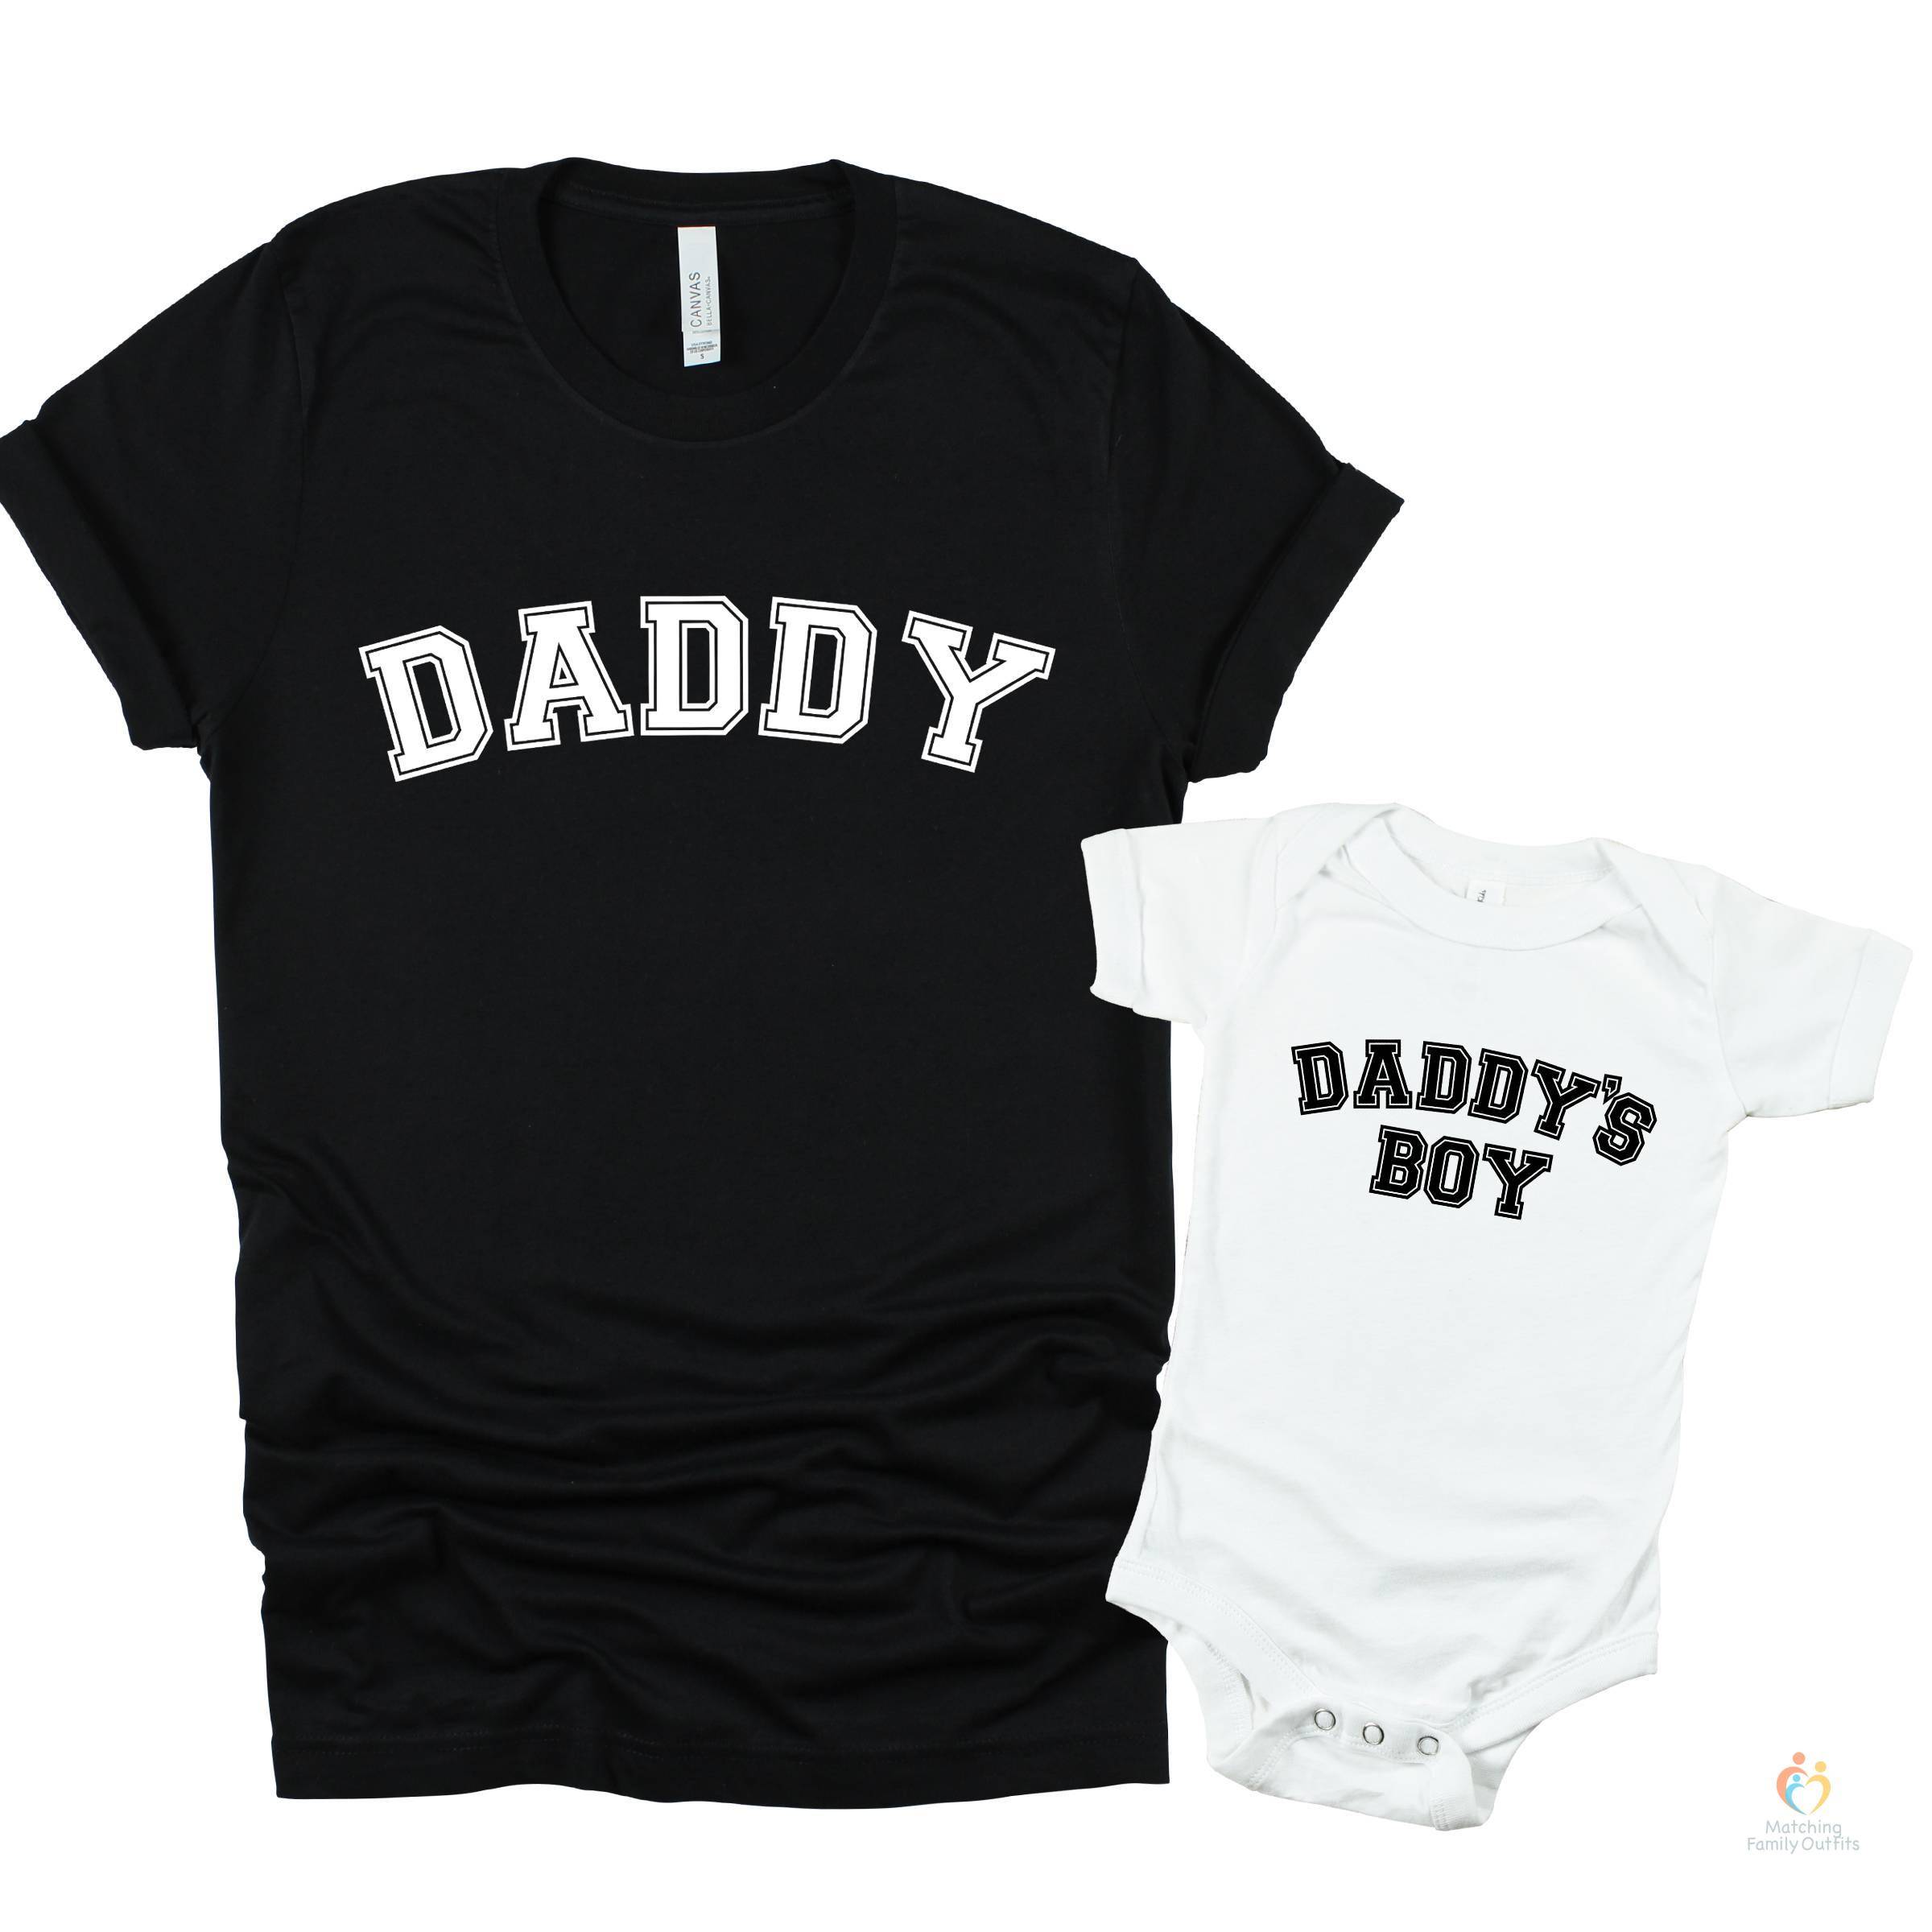 Daddy and Daddy’s Boy